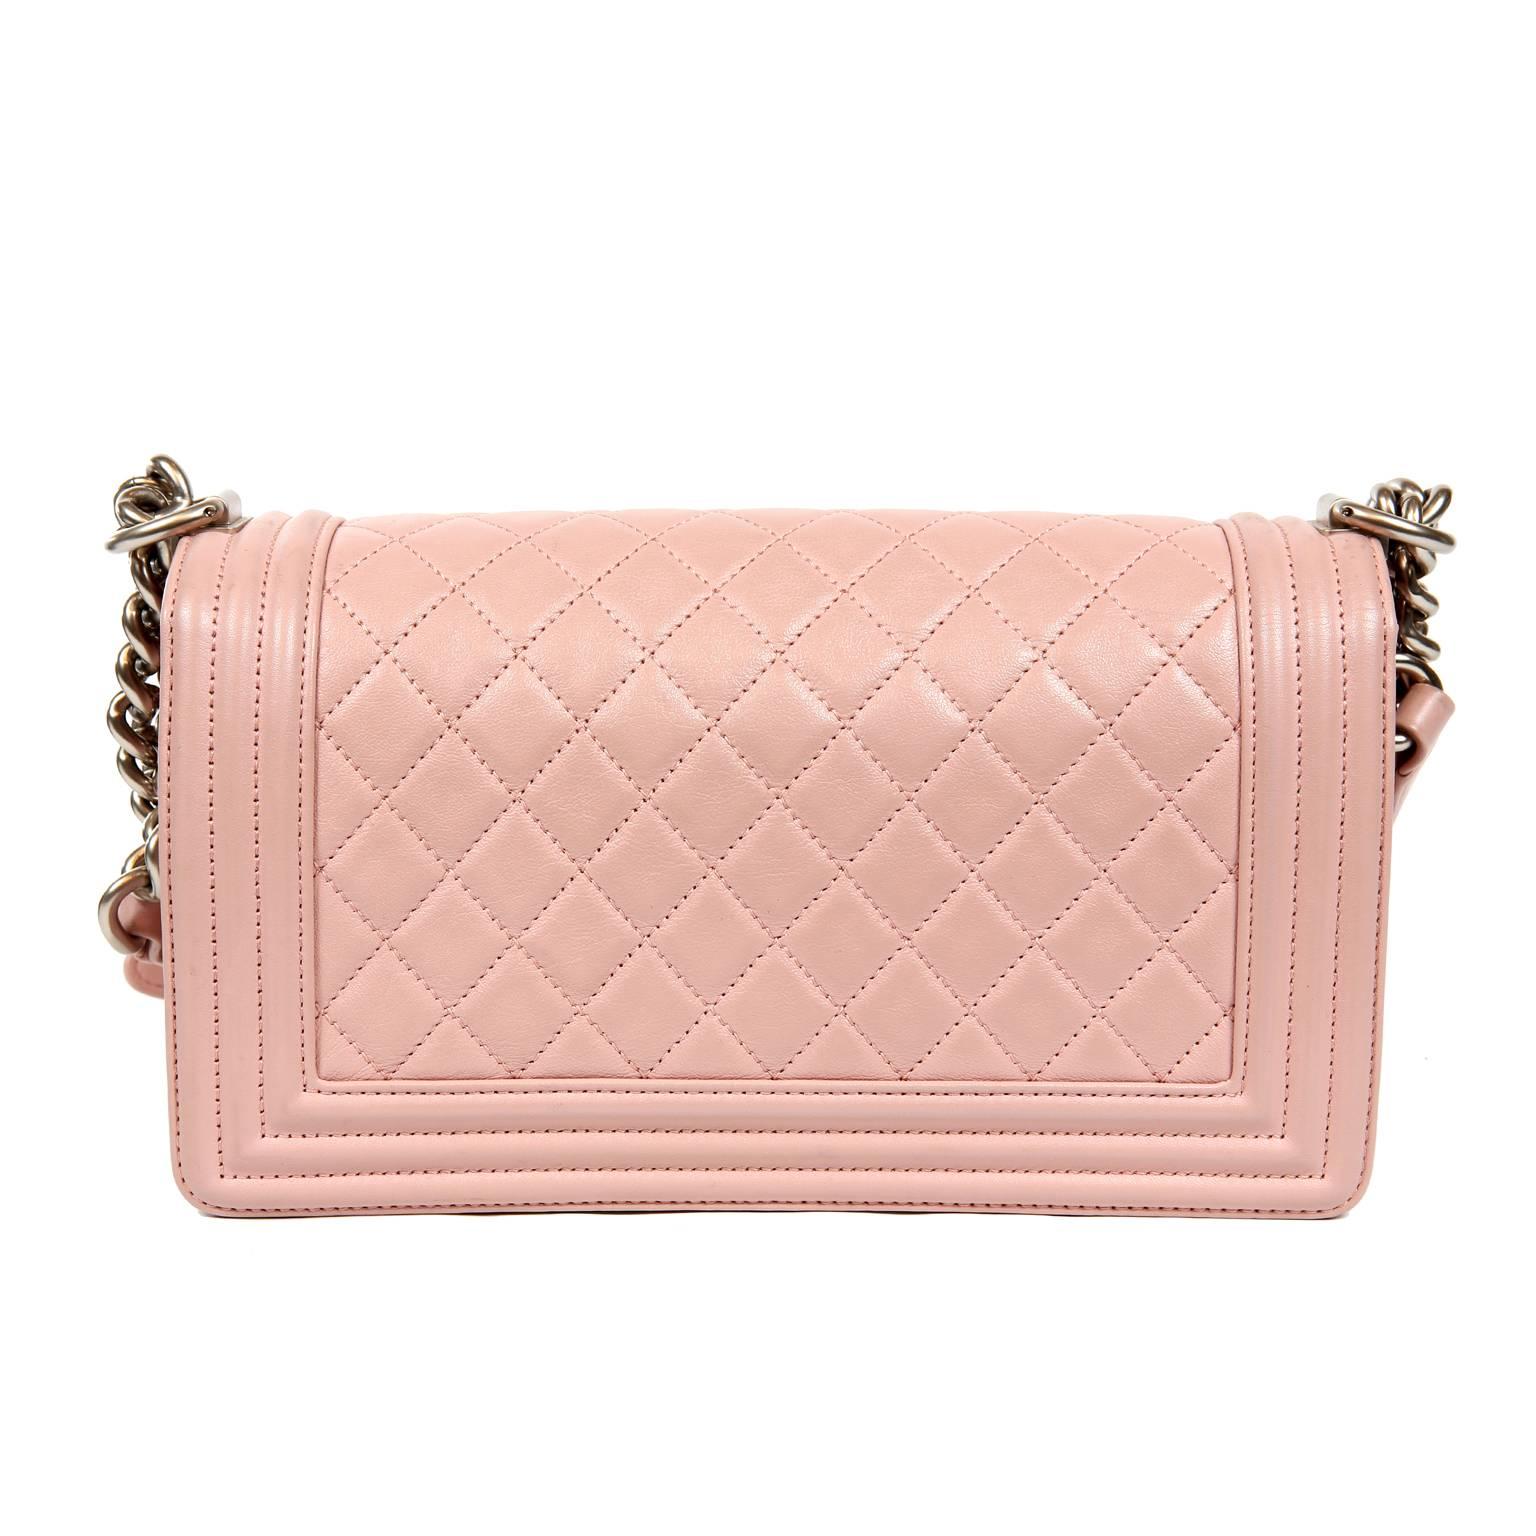 This authentic Chanel Pink Leather Medium Boy Bag is pristine; never before carried.     The updated design is structured and edgy with a versatility that makes it extremely popular.  
Ballerina pink leather is quilted in signature Chanel diamond